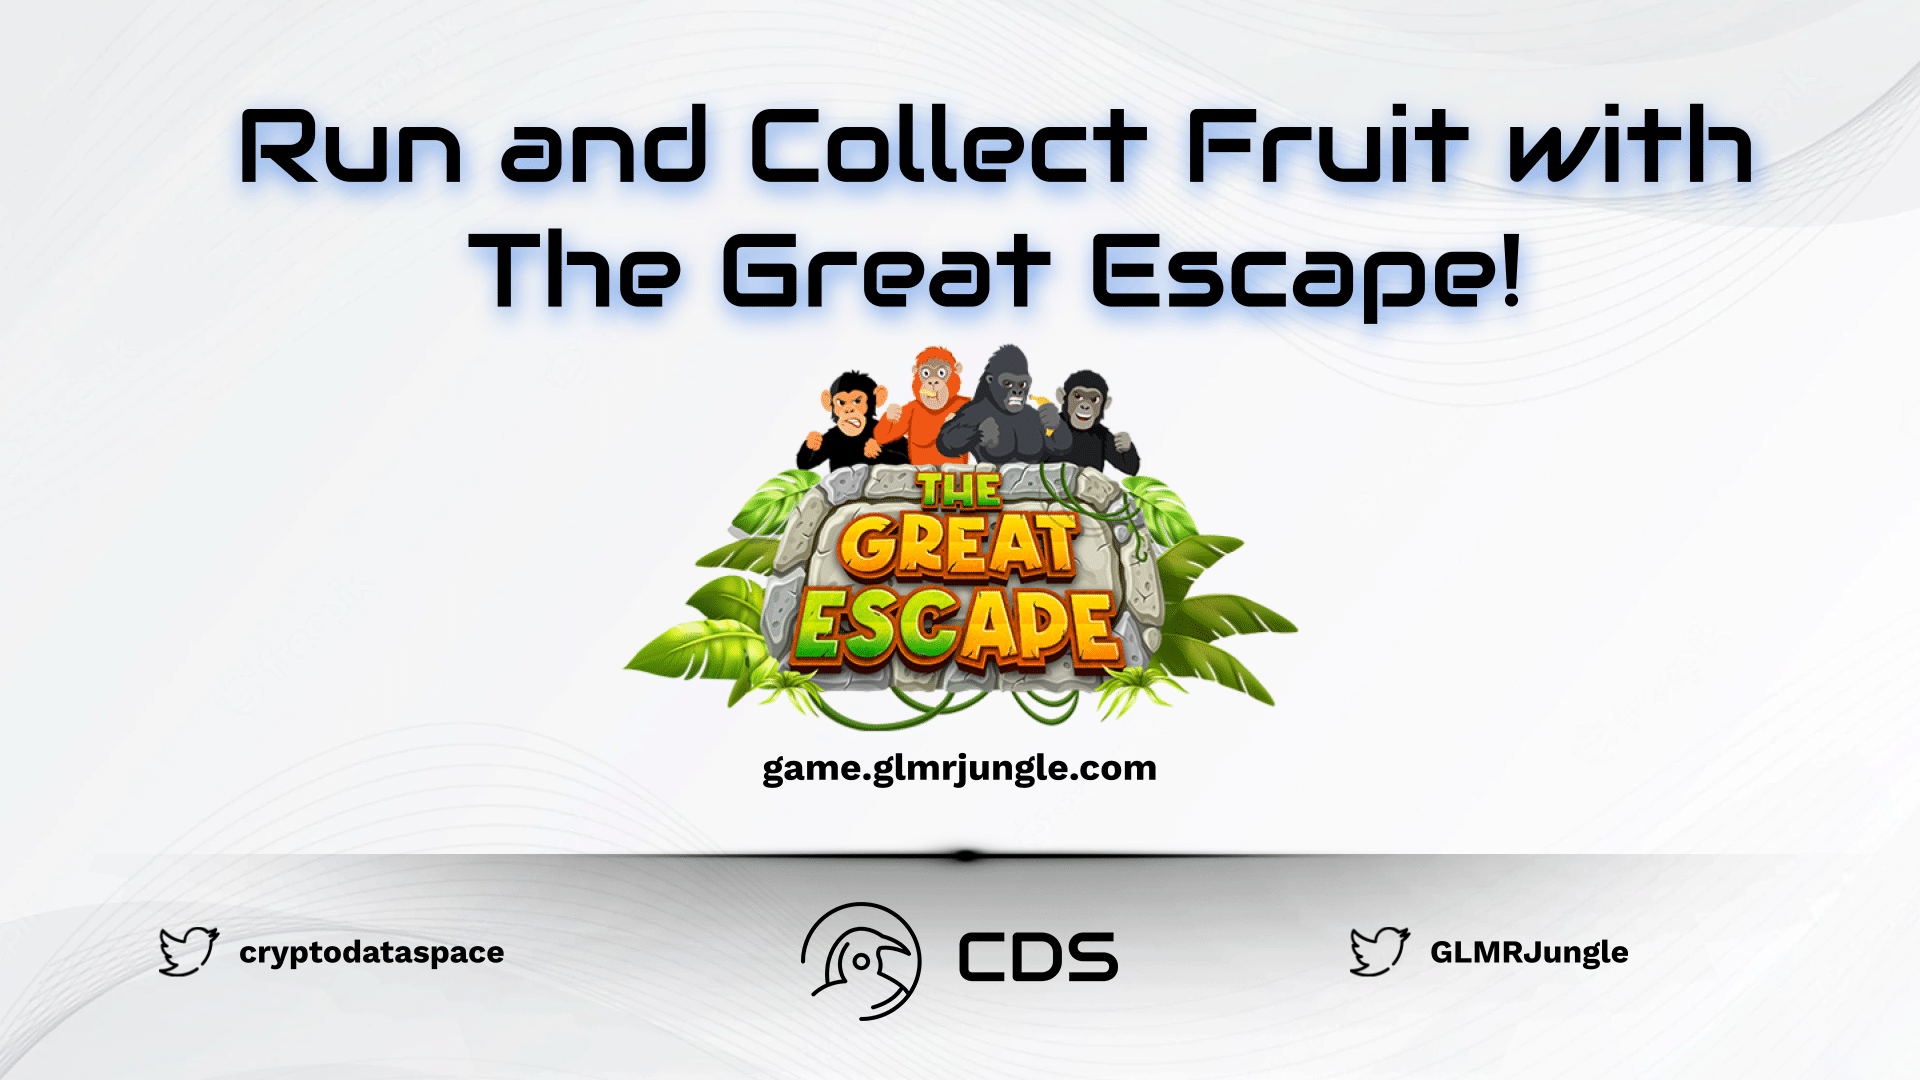 Run and Collect Fruit with The Great Escape!